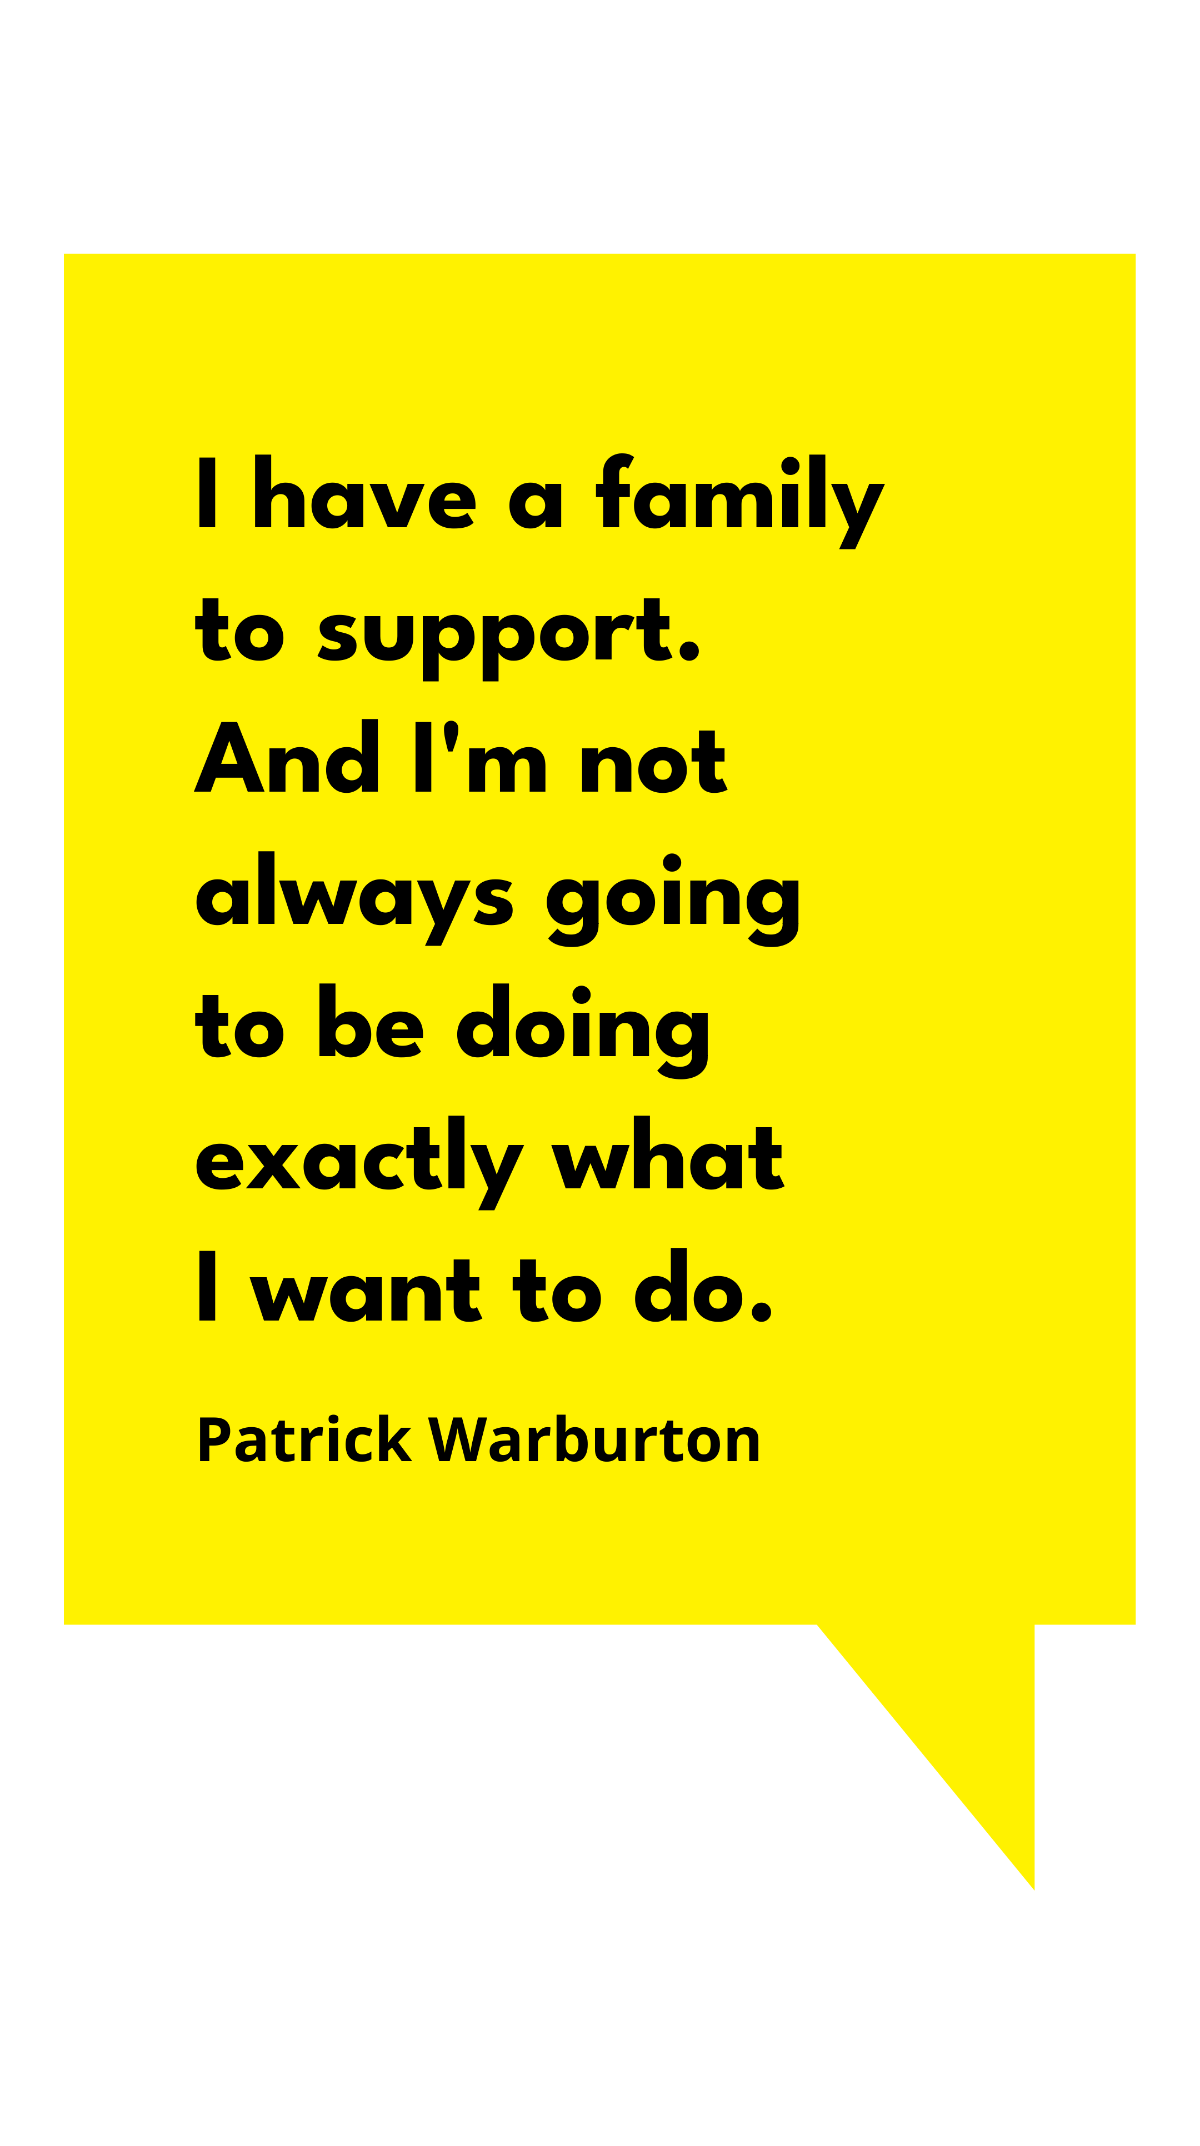 Patrick Warburton - I have a family to support. And I'm not always going to be doing exactly what I want to do.